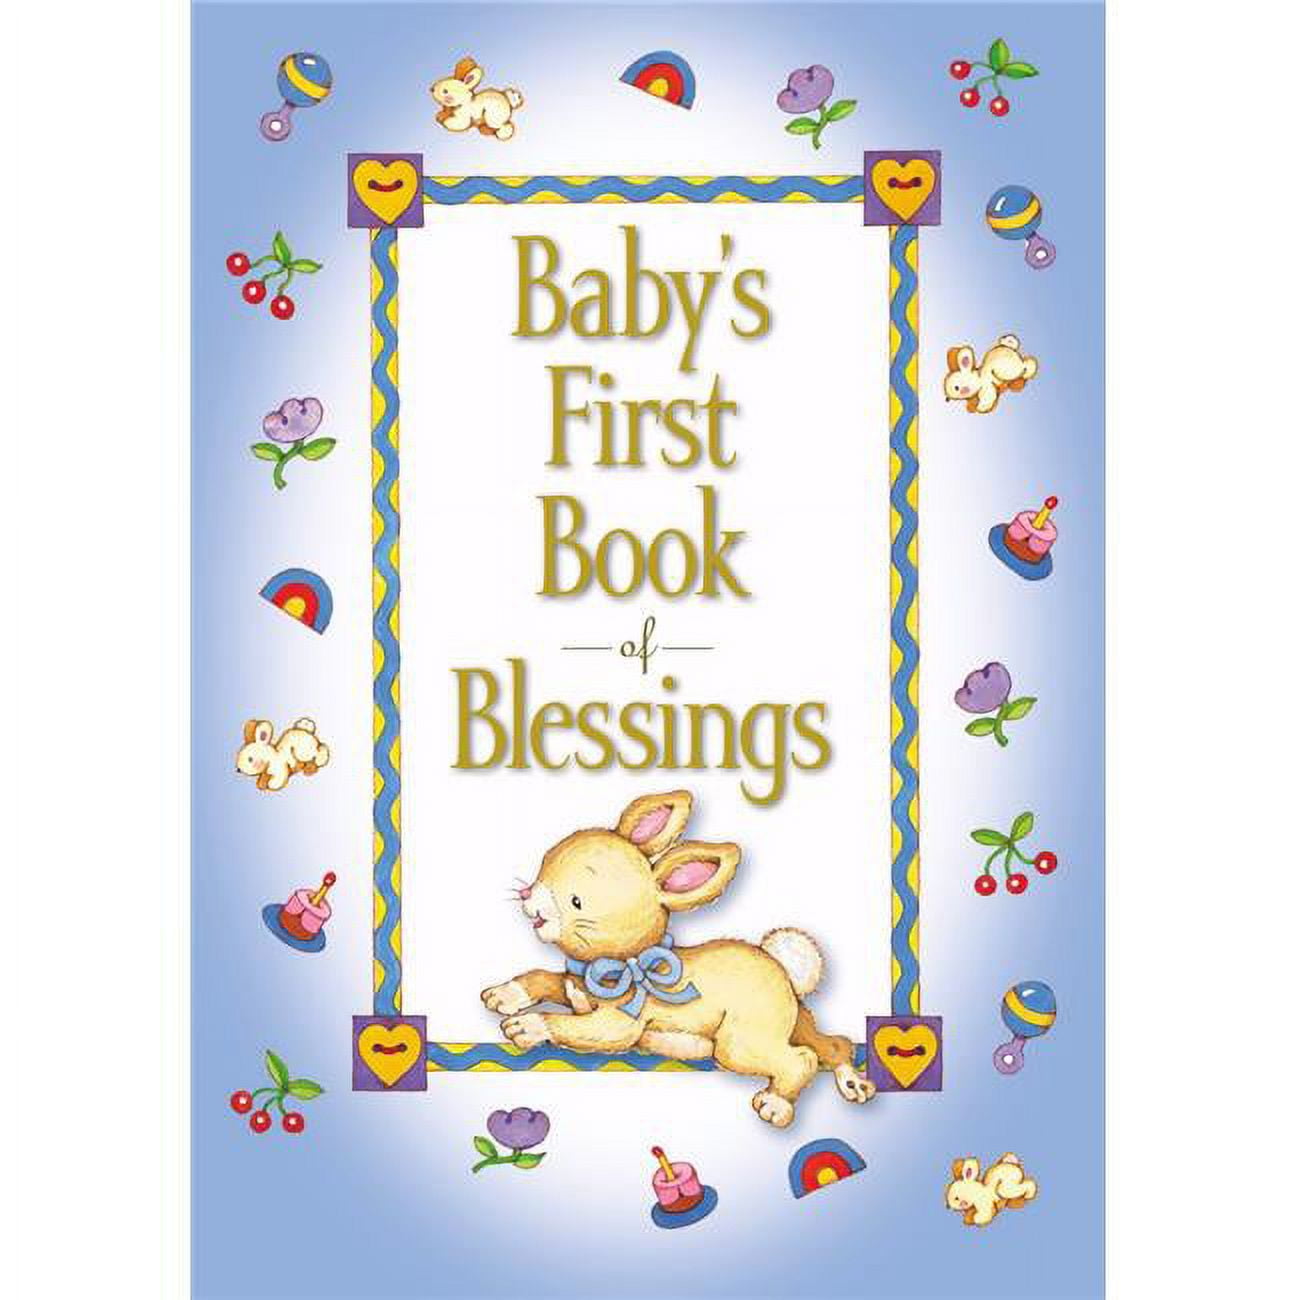 157883 Babys First Book Of Blessings - Mar 2020